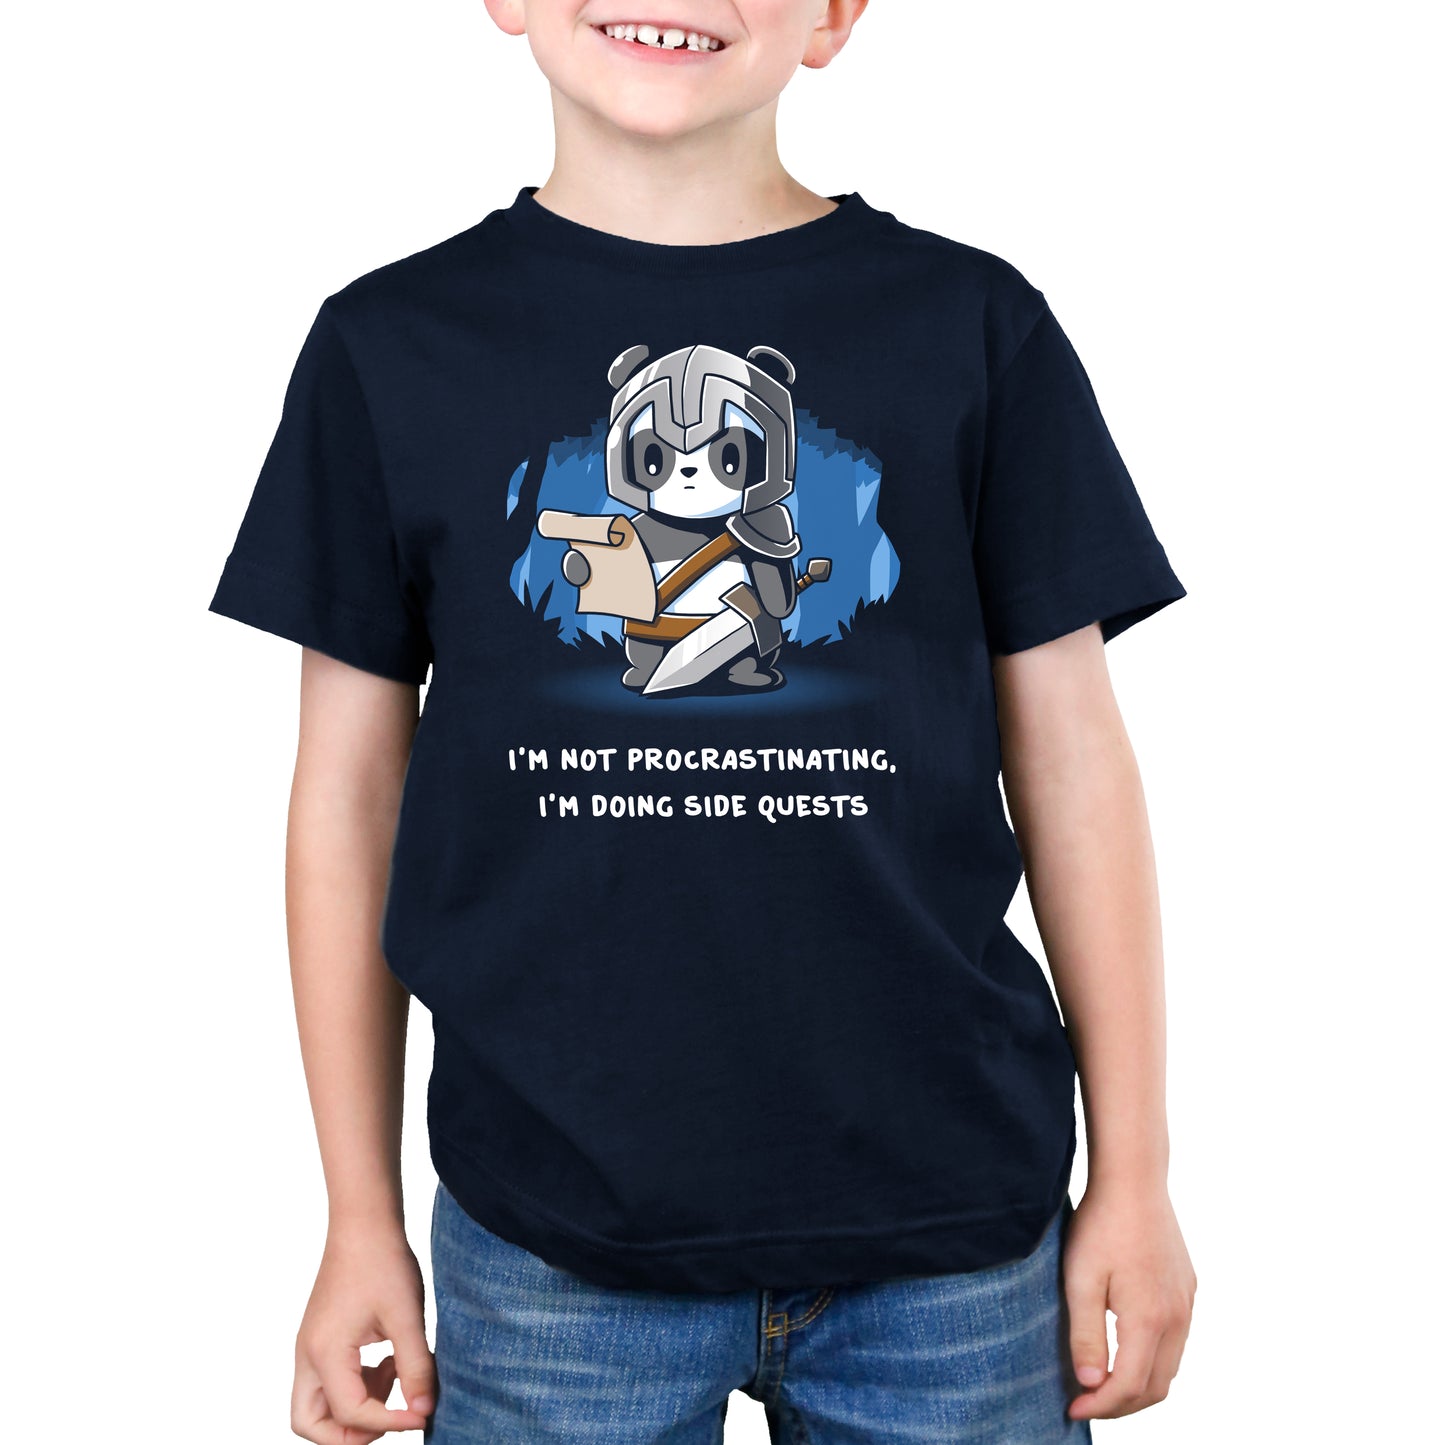 A young boy wearing a navy blue t-shirt that says, "I'm not a politician, I'm a TeeTurtle original" is now wearing a TeeTurtle "I'm Doing Side Quests" t-shirt.